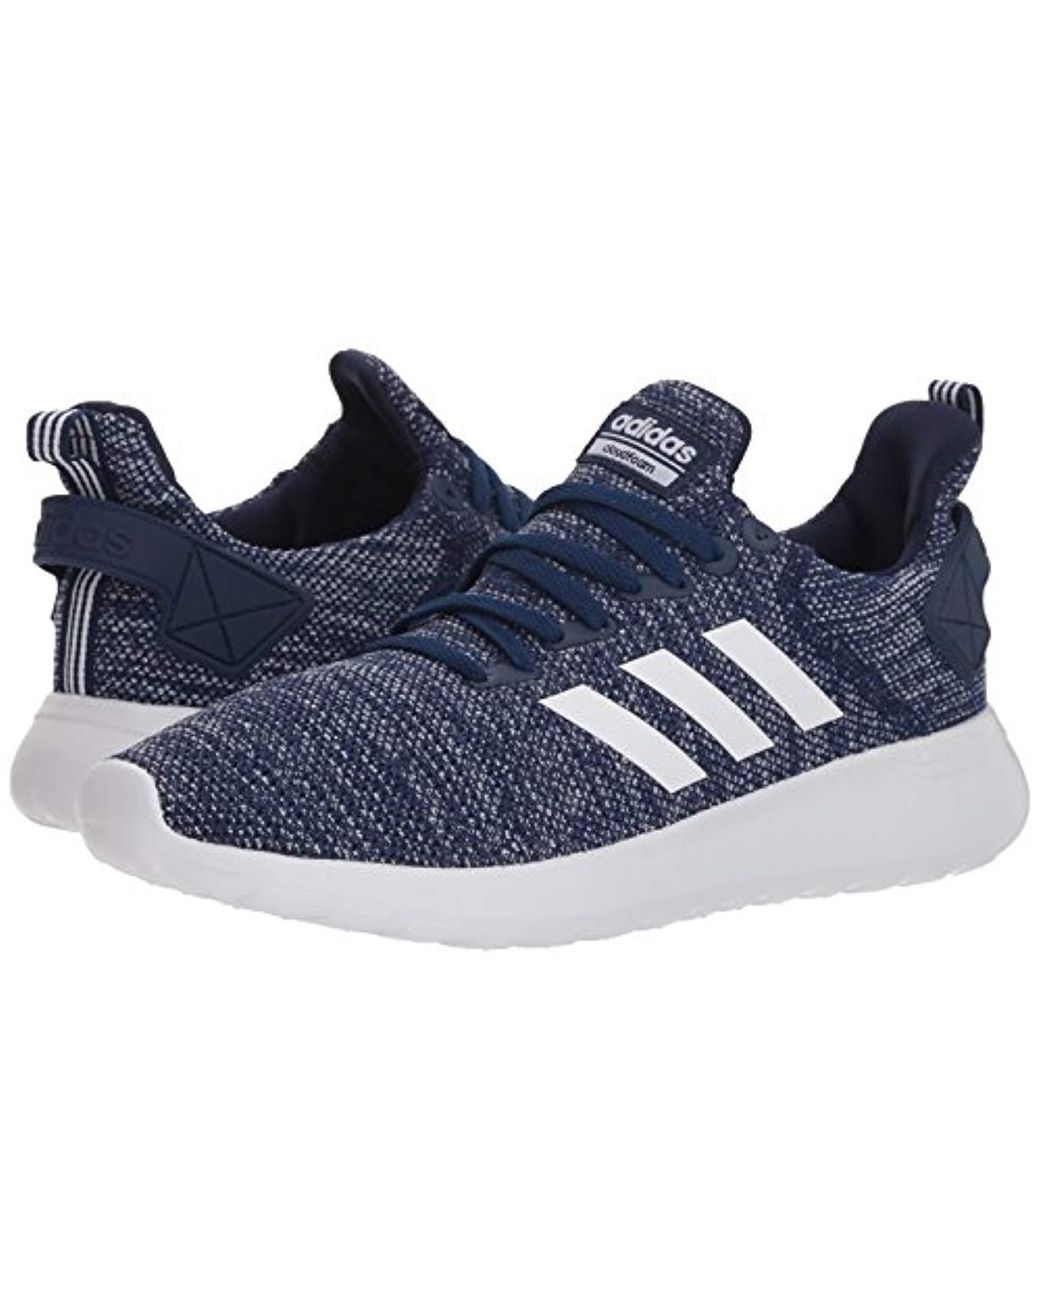 adidas Lite Racer Byd Shoes in Dark Blue/White (Blue) for Men | Lyst